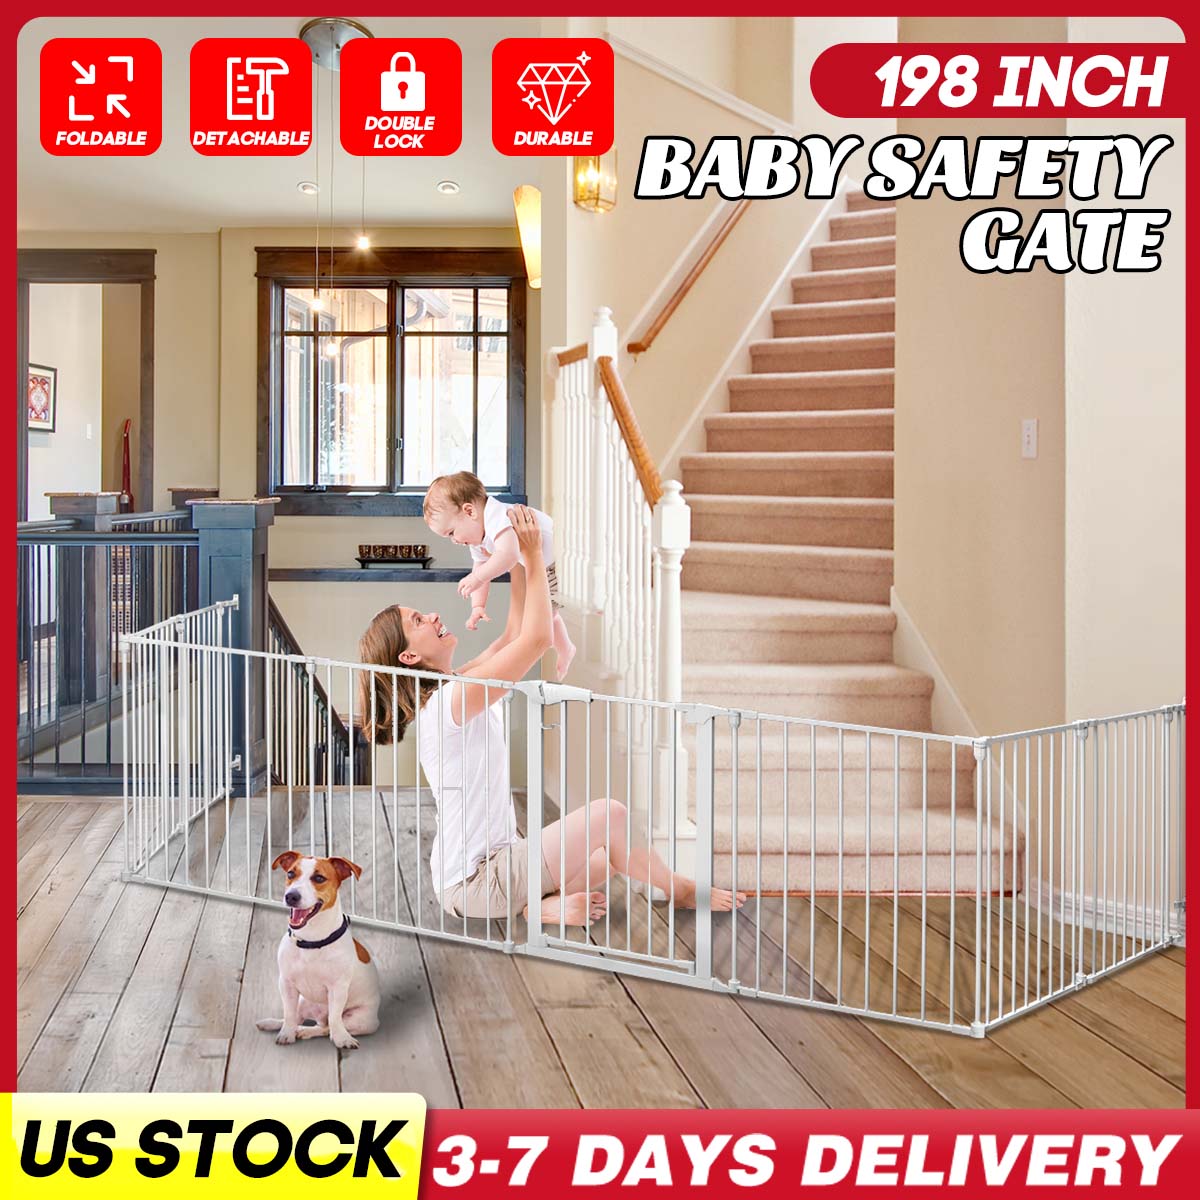 Comomy-198-inch-Long-Baby-Gate-Extra-Wide-Baby-Gate-Play-Yard-8-Panel-Foldable-Safety-Gate-for-Pet-C-1933282-1